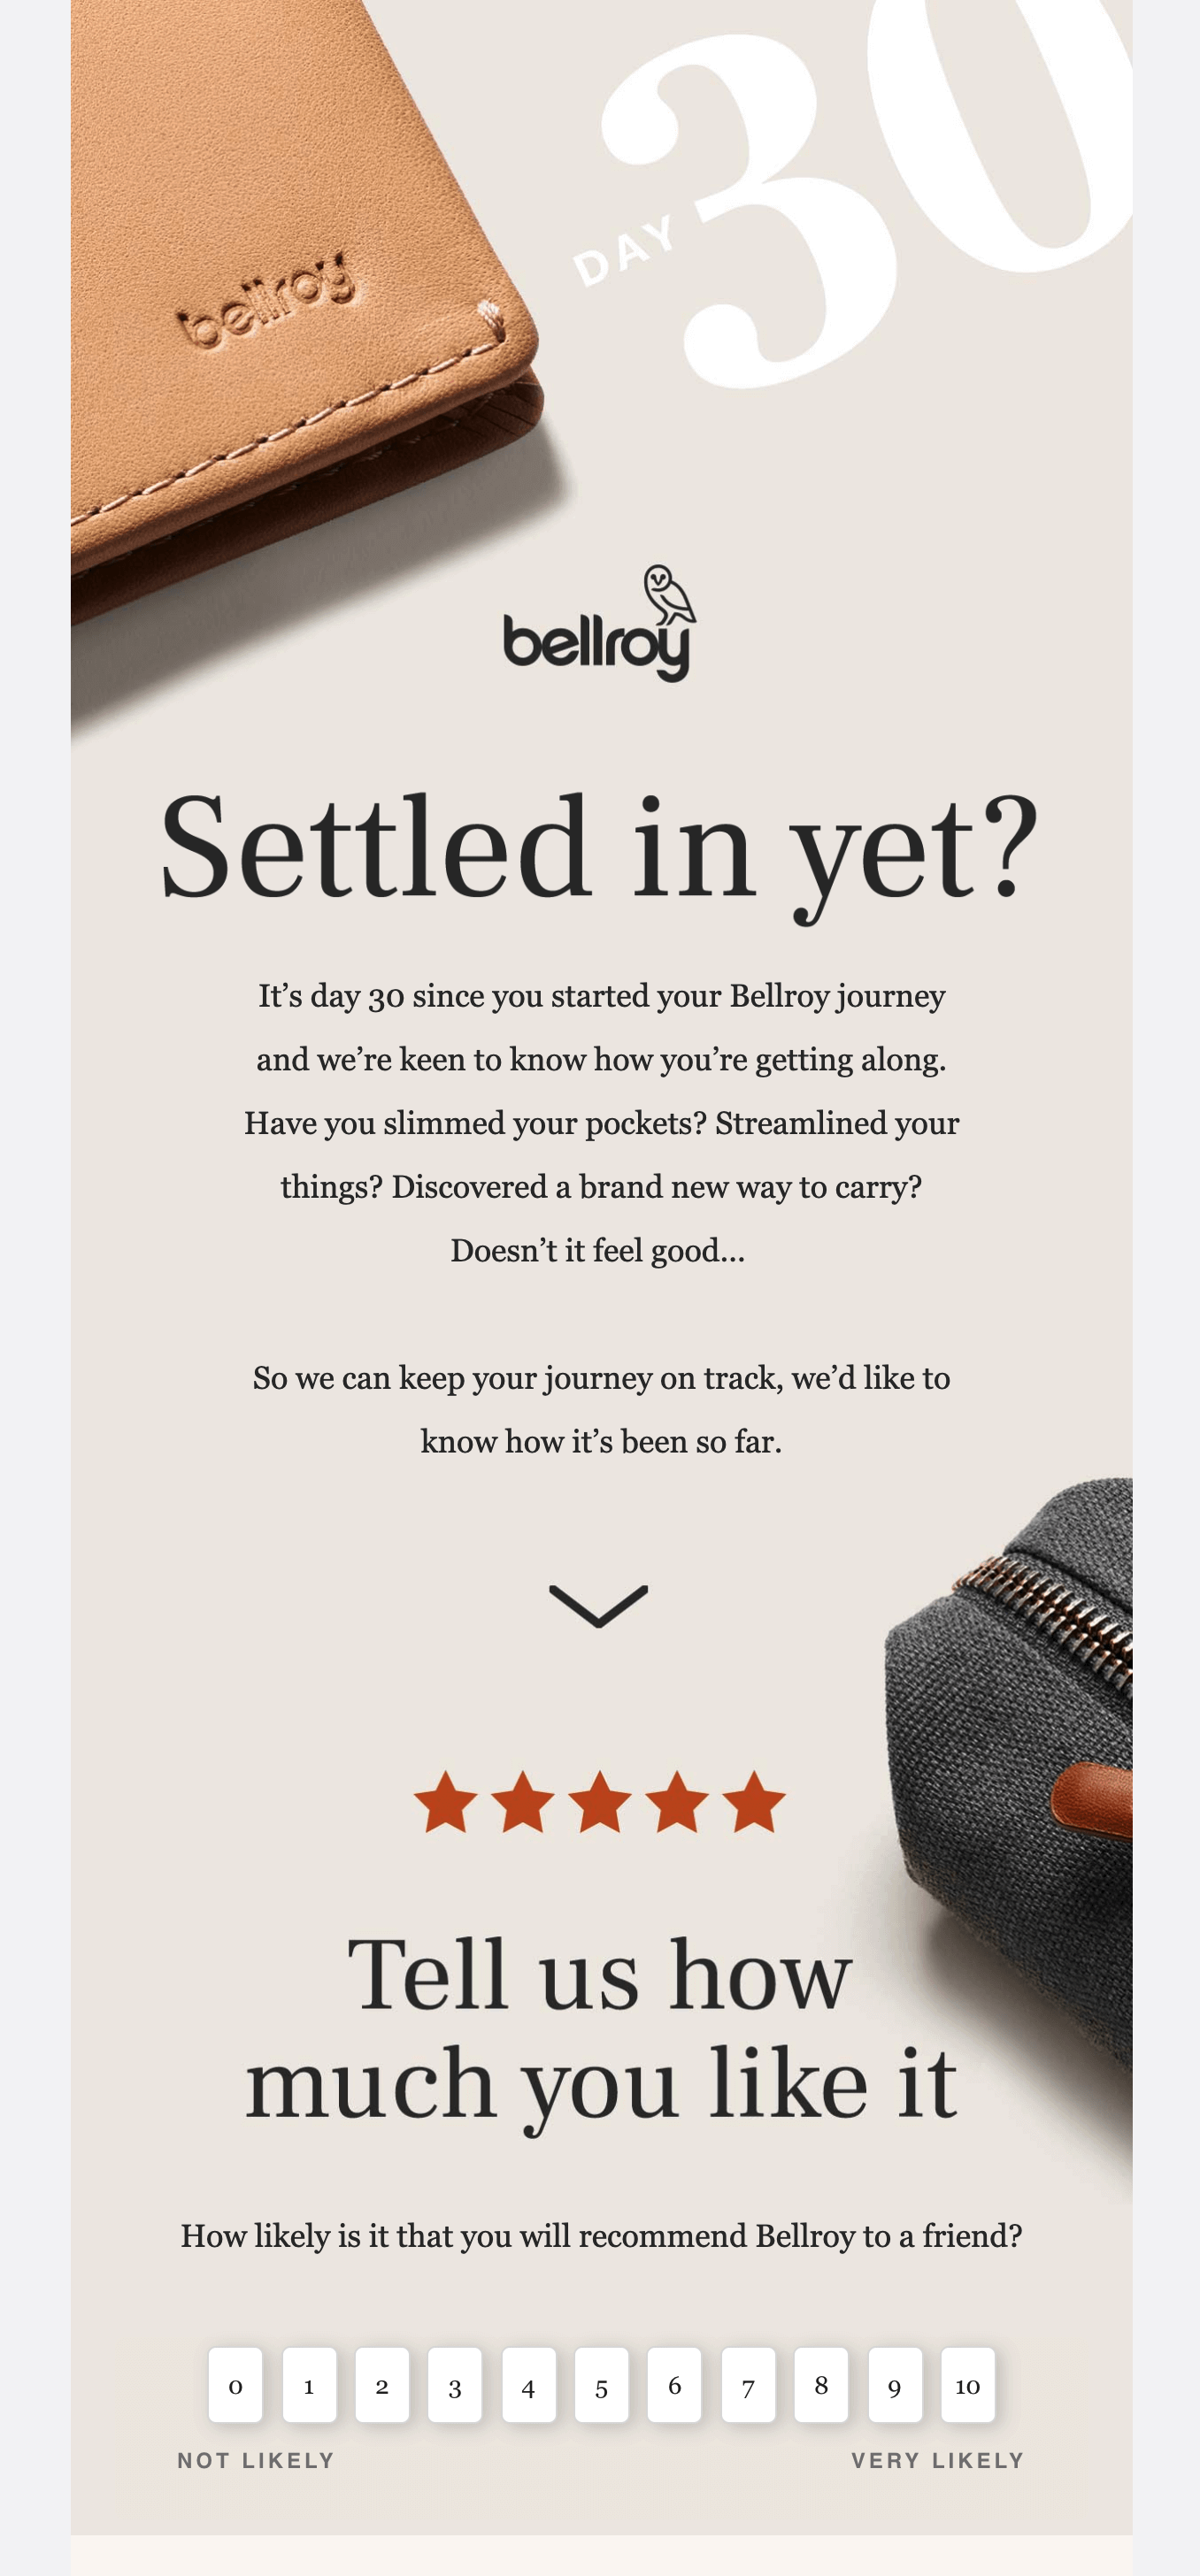 Image shows a post-purchase email from Bellroy that asks customers to rate how likely they are to recommend the brand to a friend on a scale of 1-10.